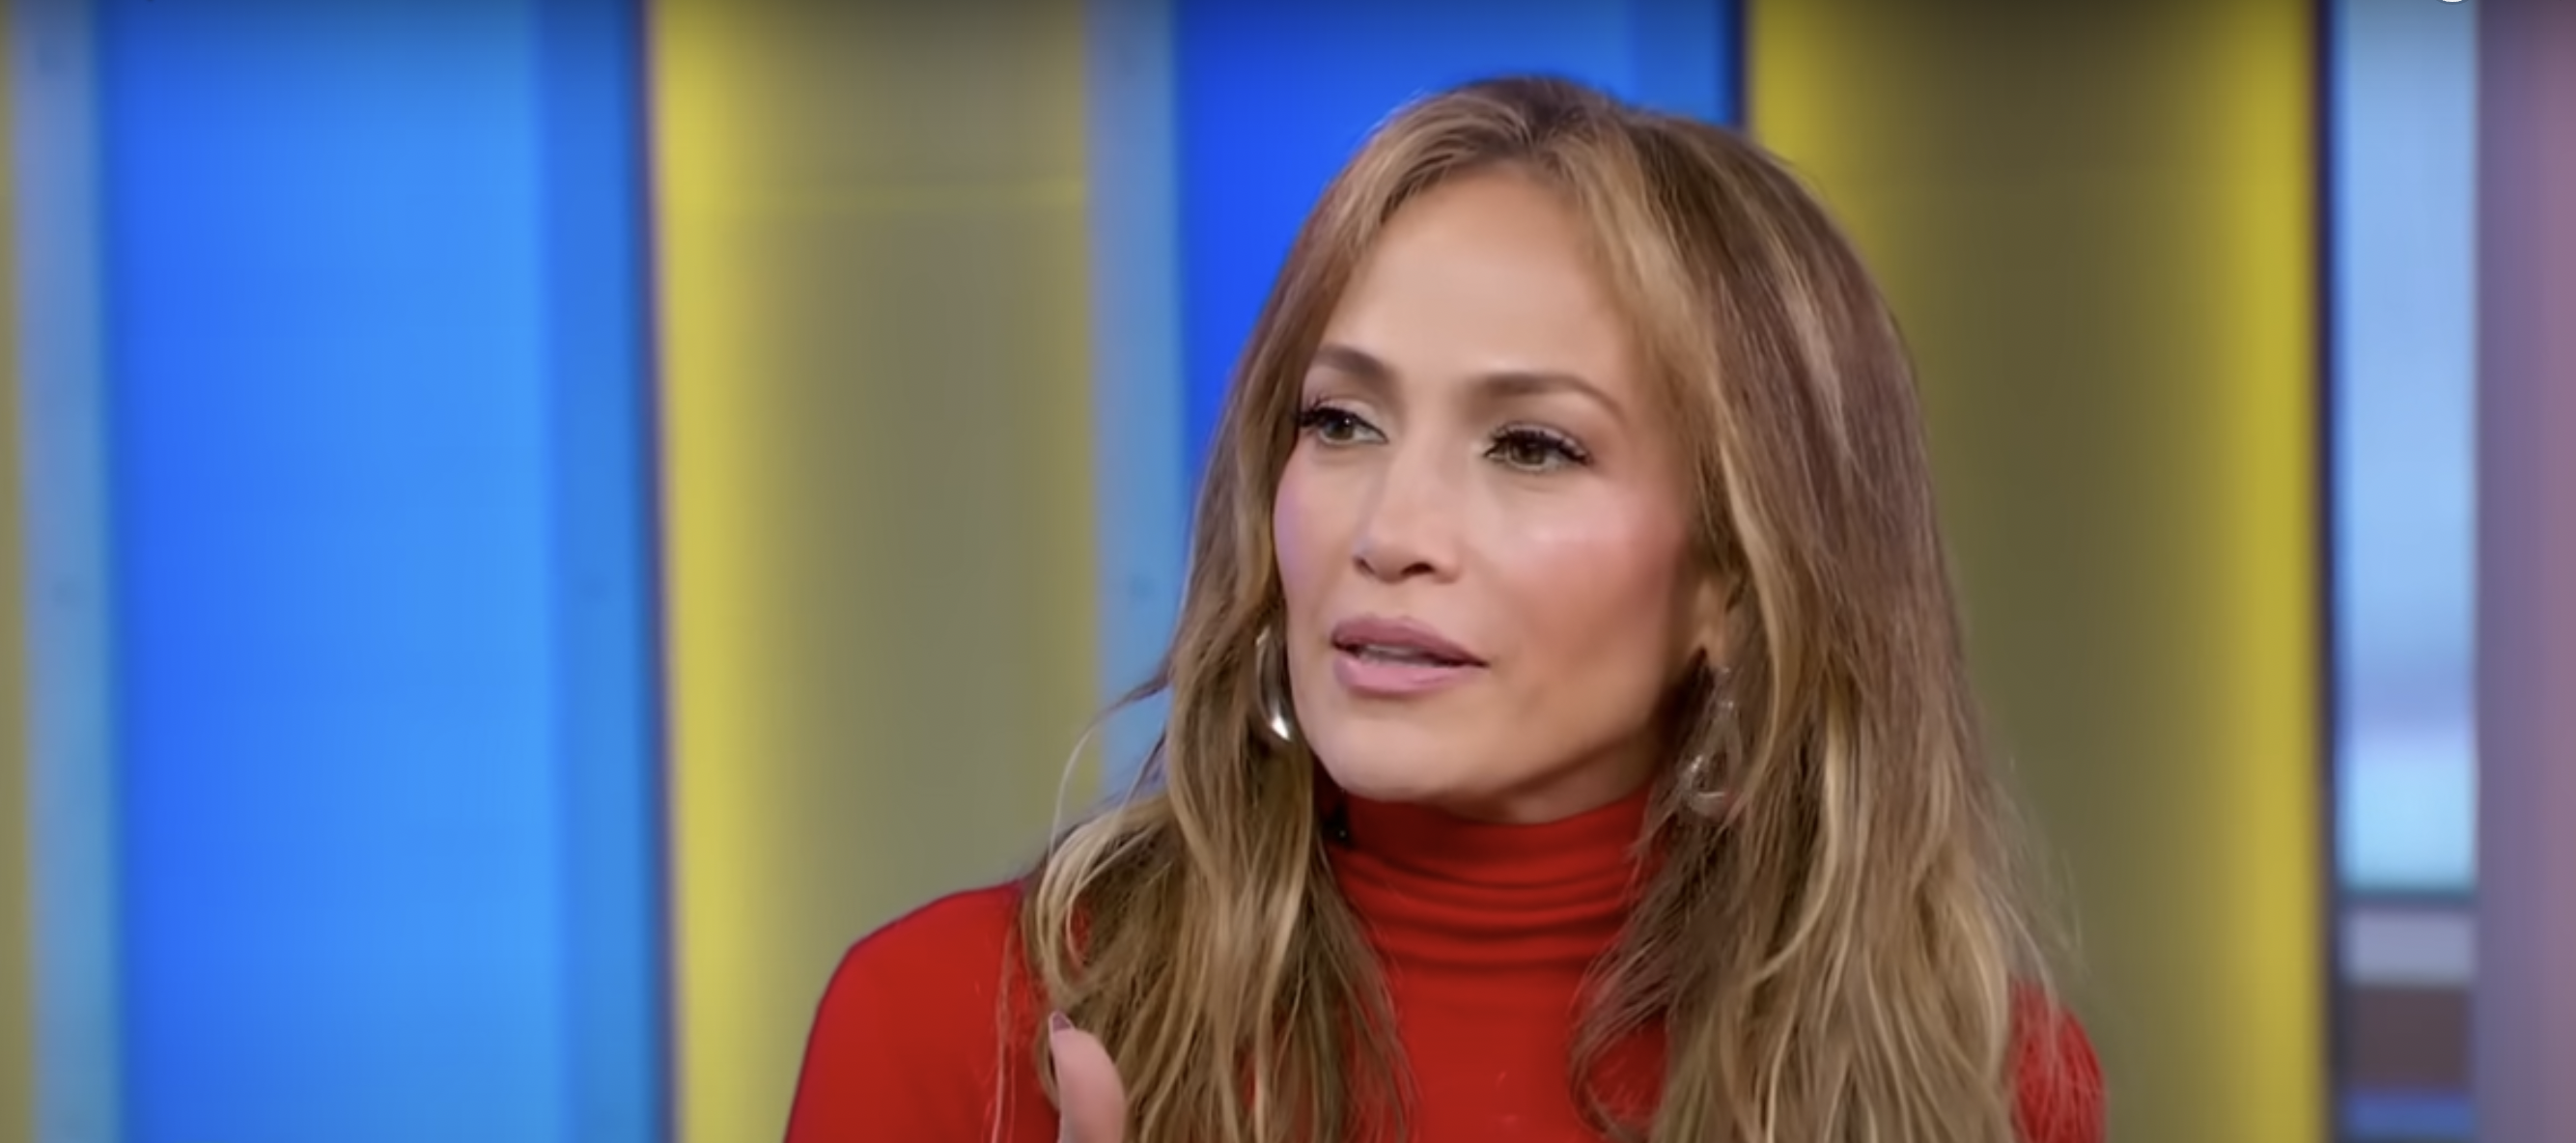 J Lo Finally Speaks Out About Ex Diddy’s Abuse After Being Accused of ‘Cowardly Silence’